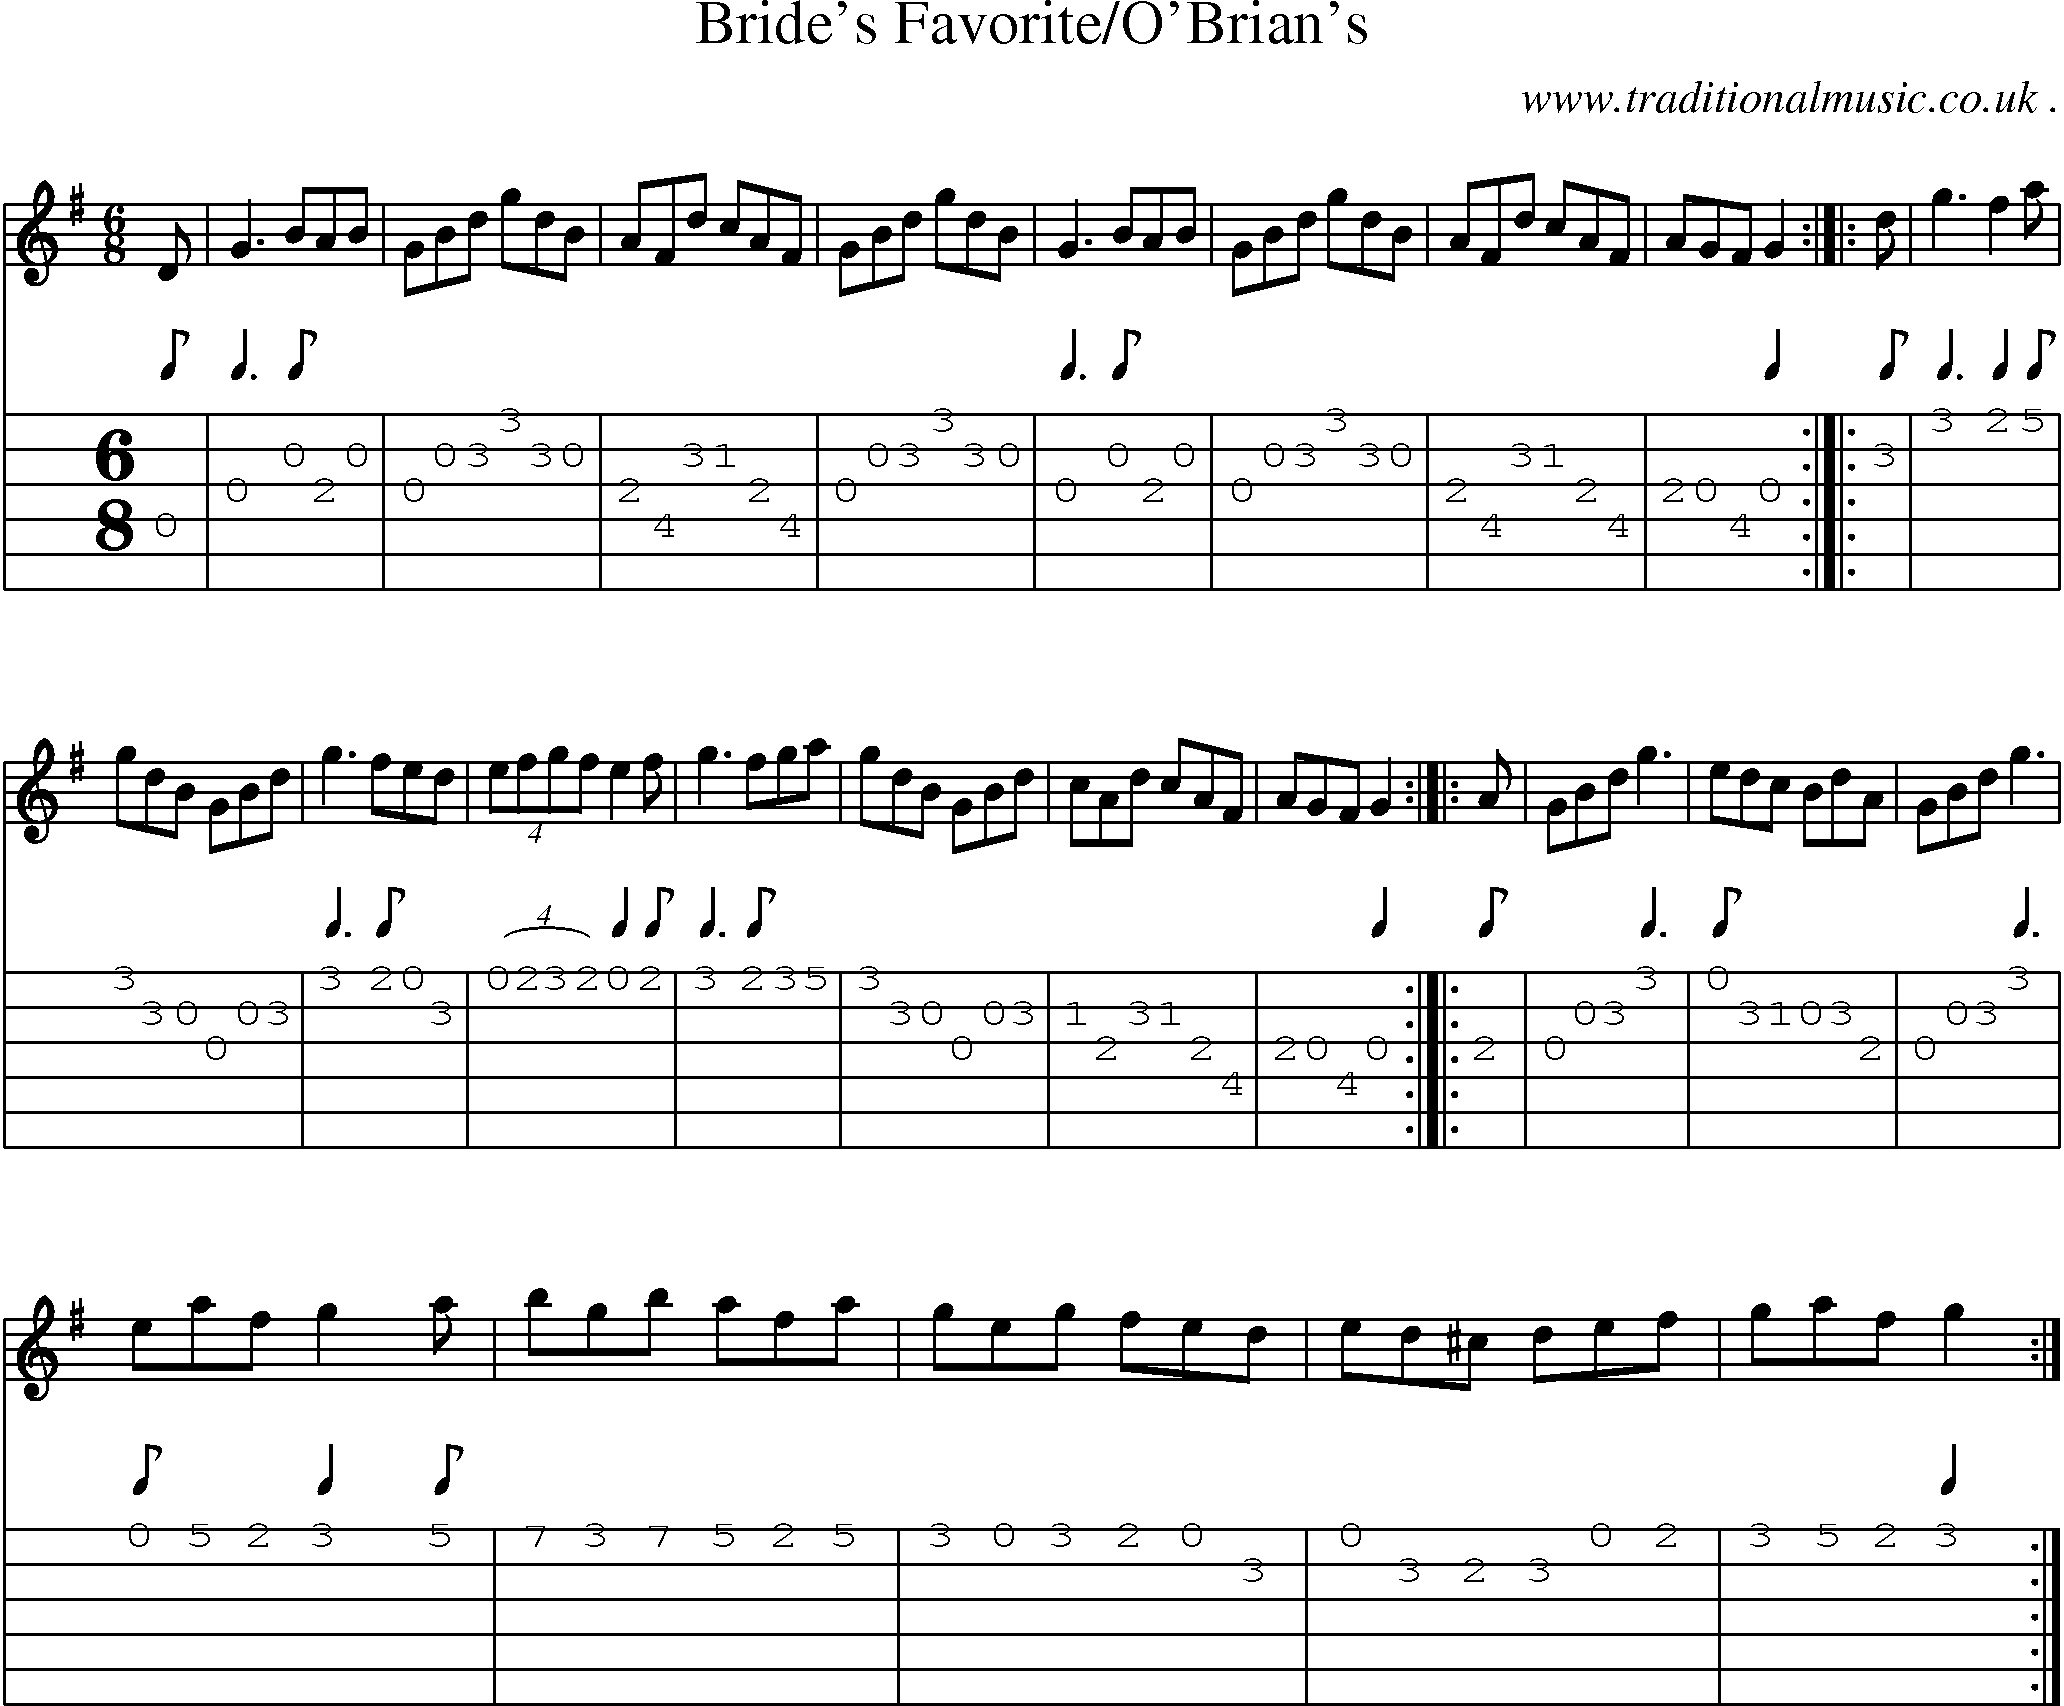 Sheet-Music and Guitar Tabs for Brides Favoriteobrians